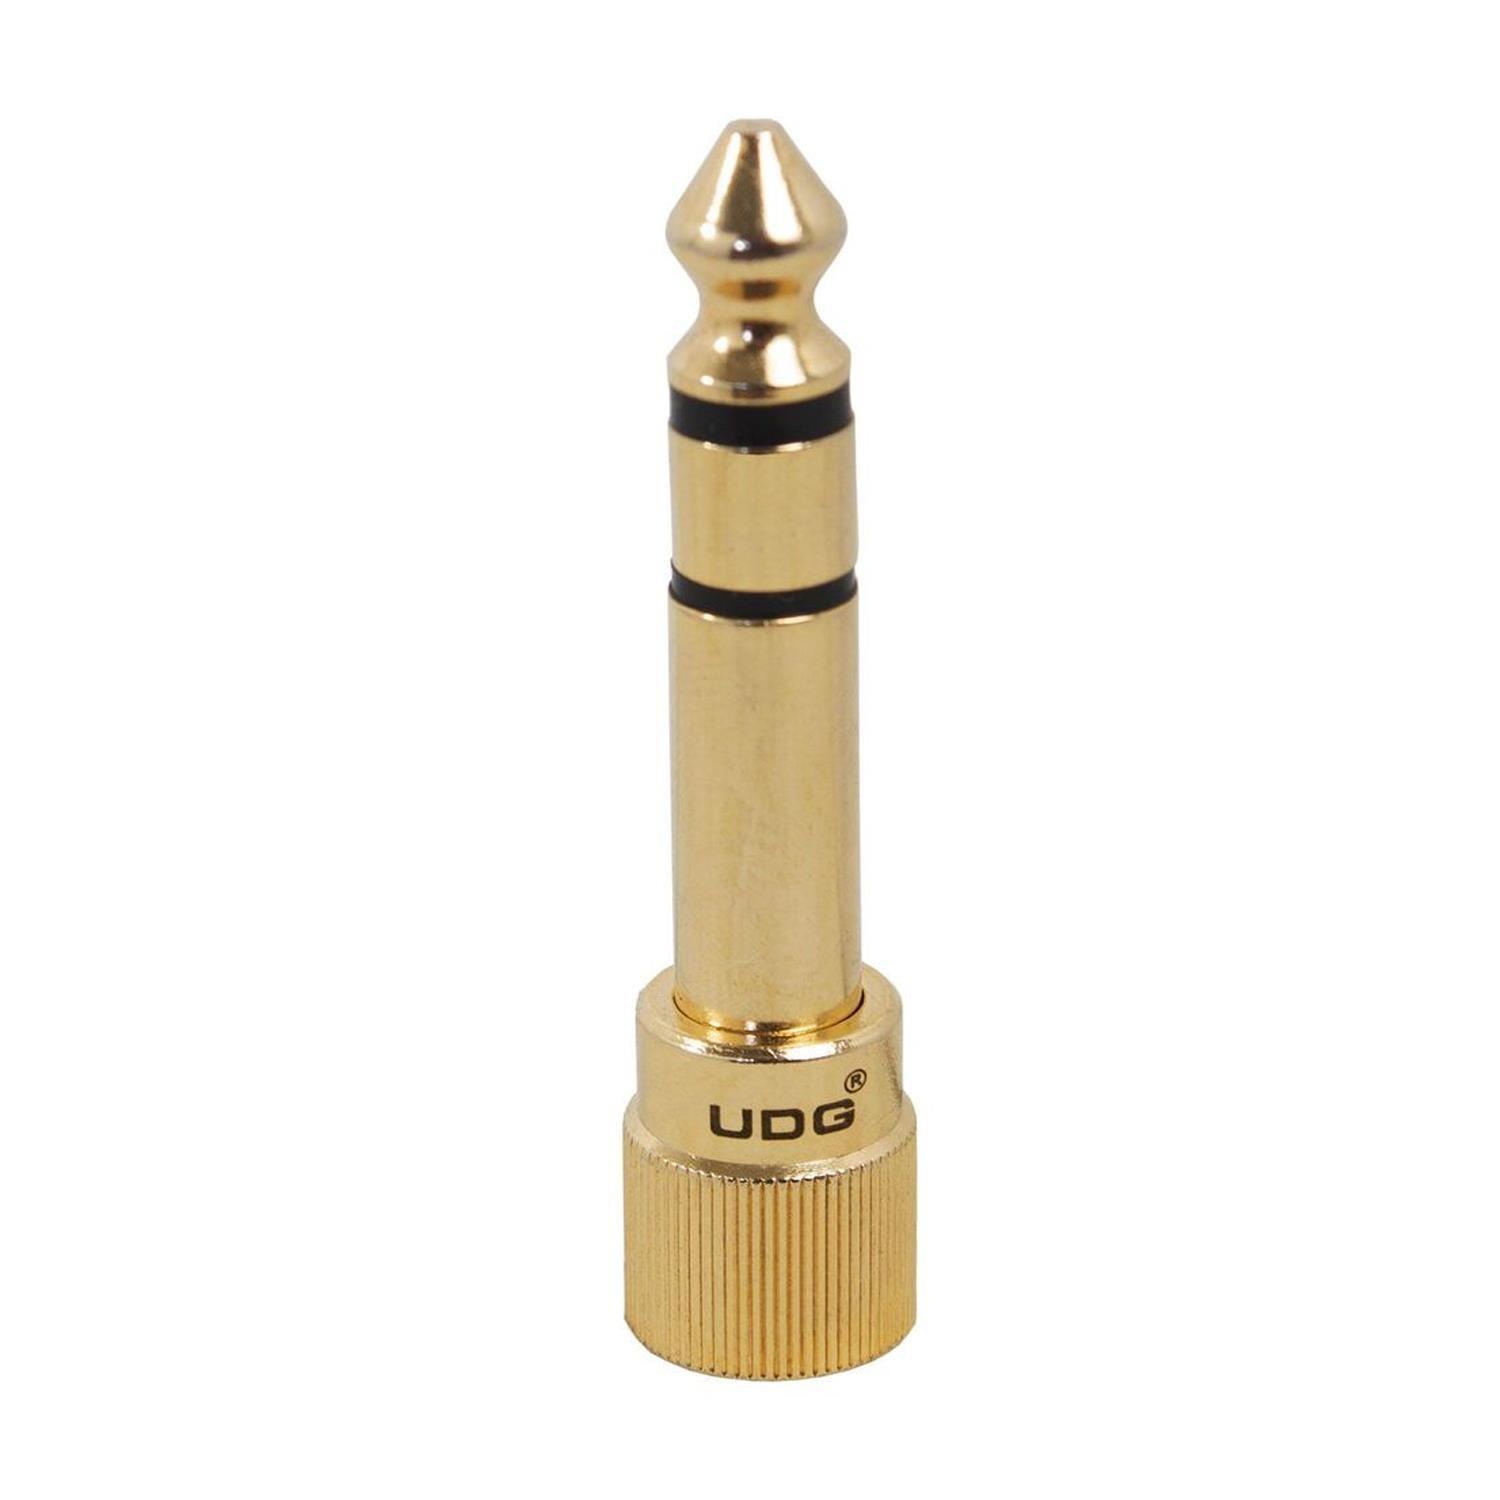 UDG Ultimate Headphone Jack Adapter Screw 3.5mm (1/8) To 6.35mm (1/4) - DY Pro Audio